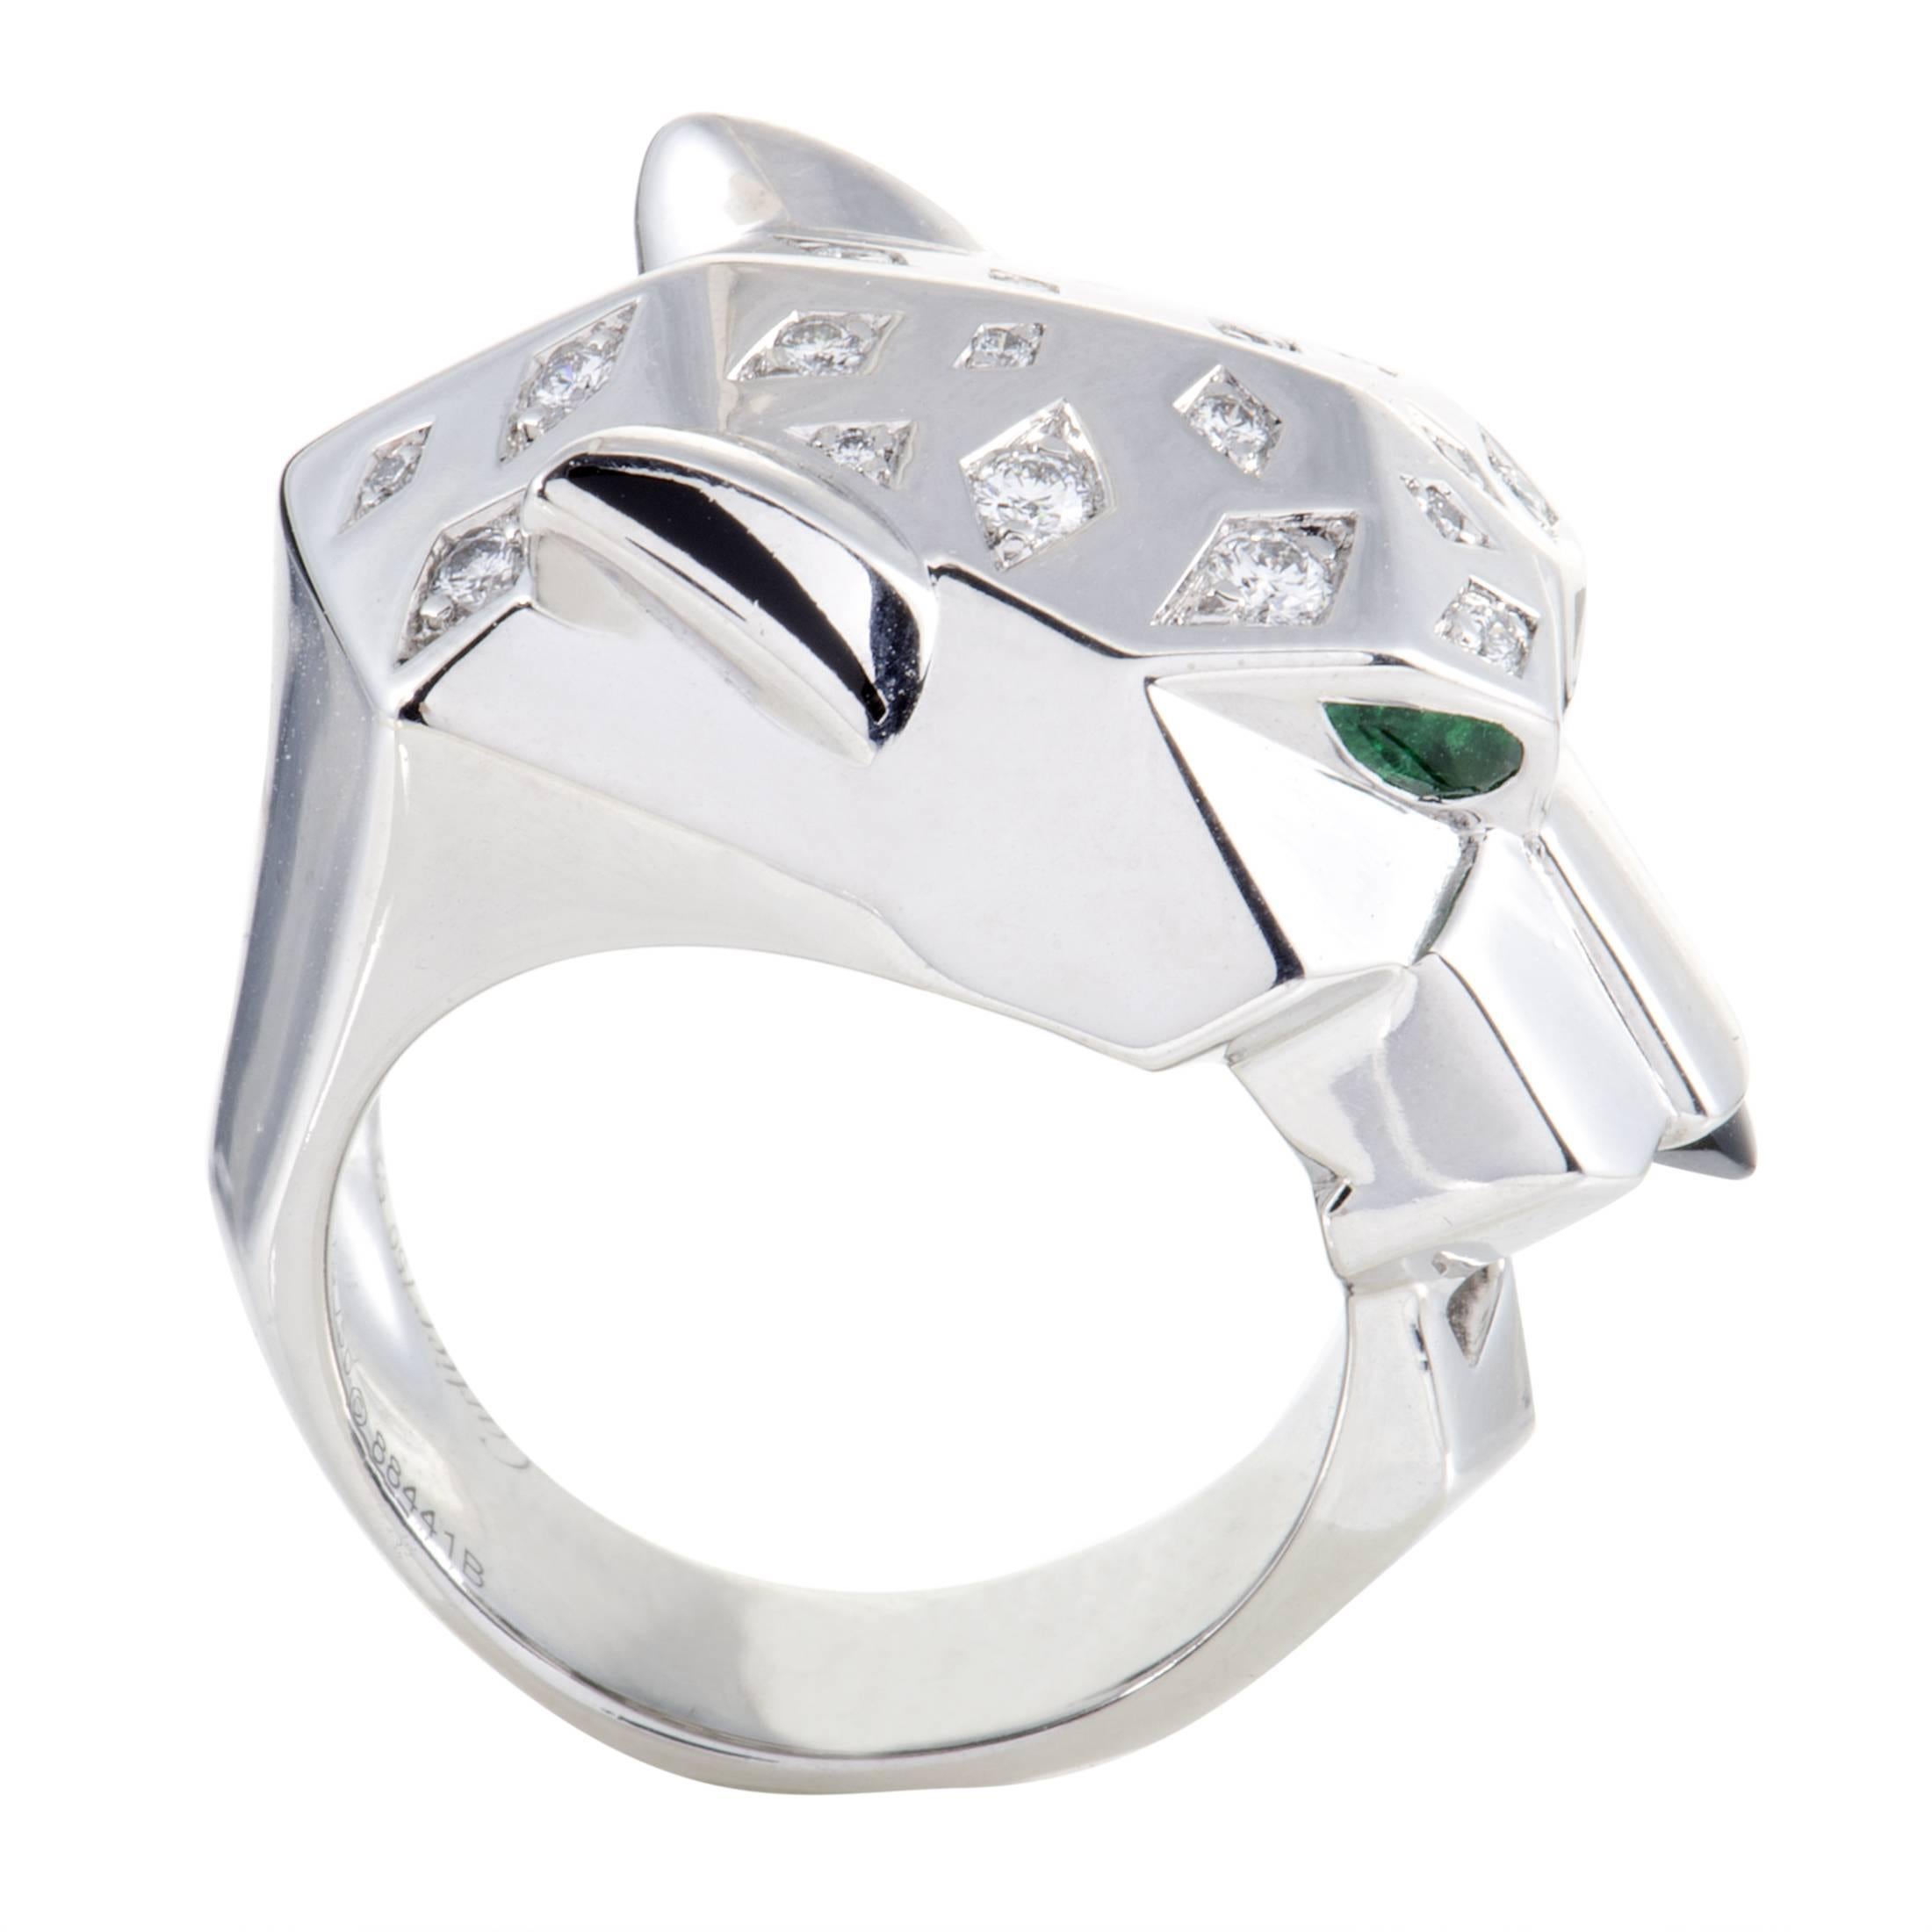 Bold style and remarkable quality produce a compelling allure in this fantastic 18K white gold ring from Cartier which is crafted in their emblematic form of a panther while set with glistening diamonds, nifty emeralds and a stunning onyx